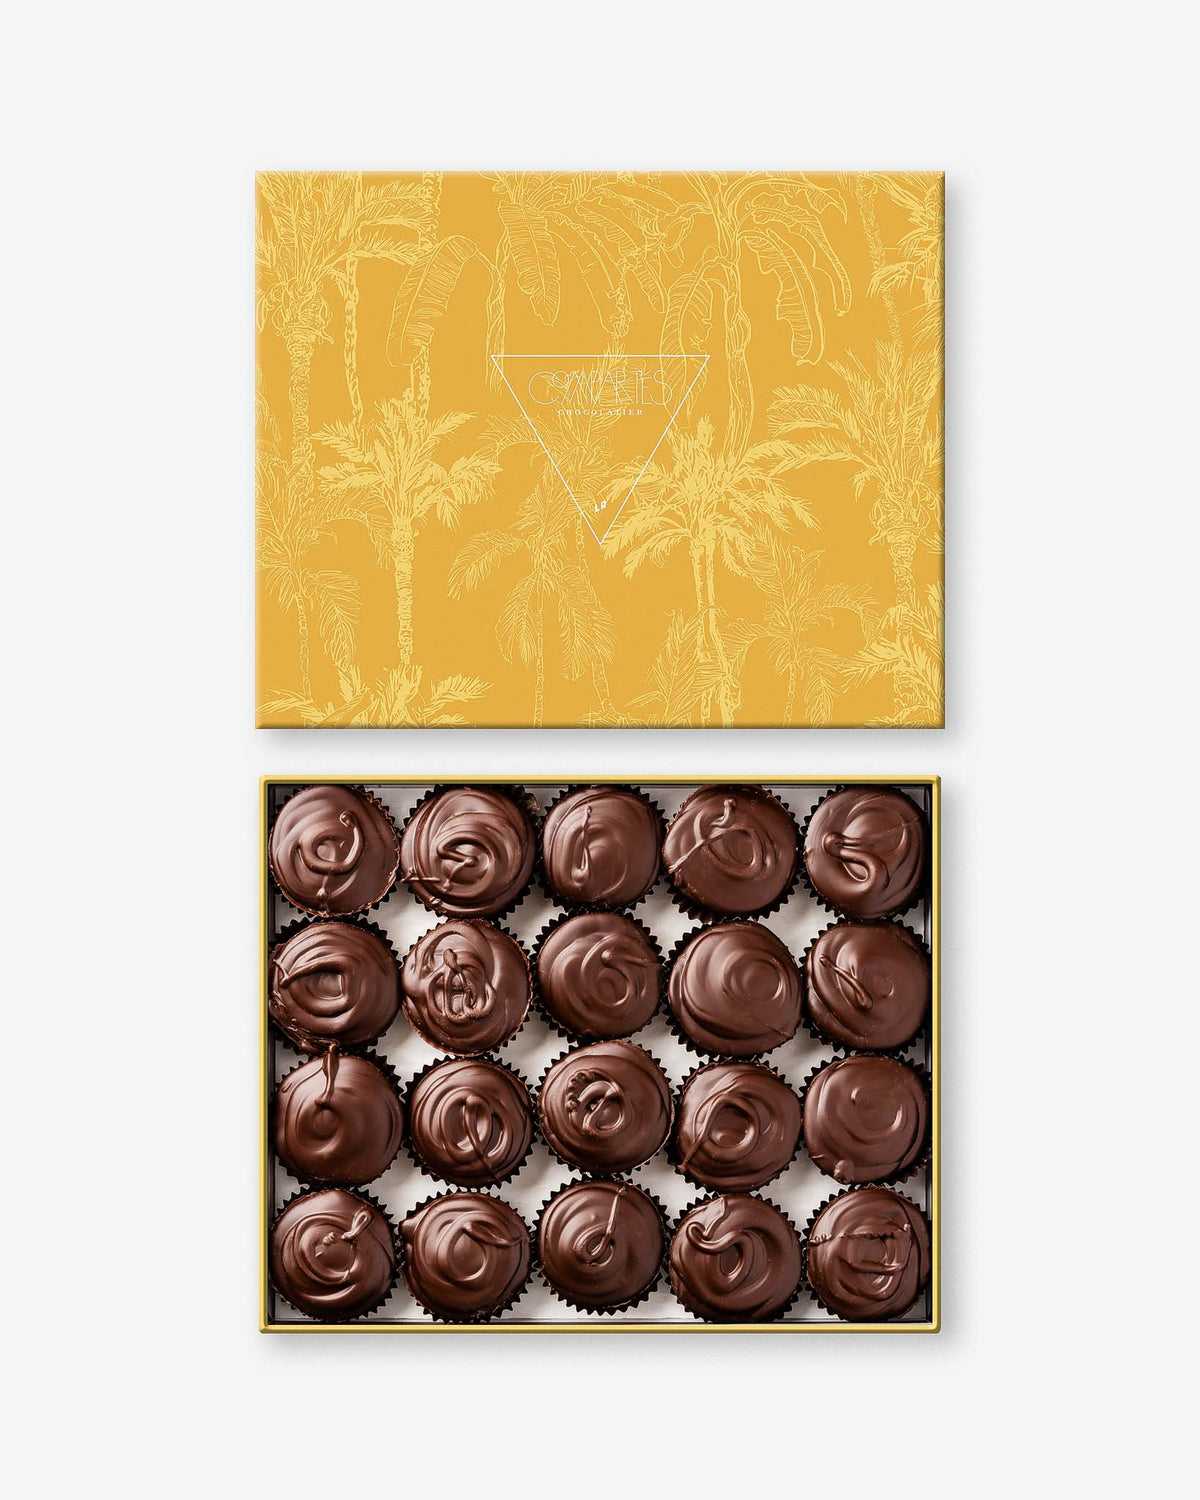 Gourmet Chocolate Peanut Butter Cup Box - Luxury Chocolate Gifts by Compartes Los Angeles